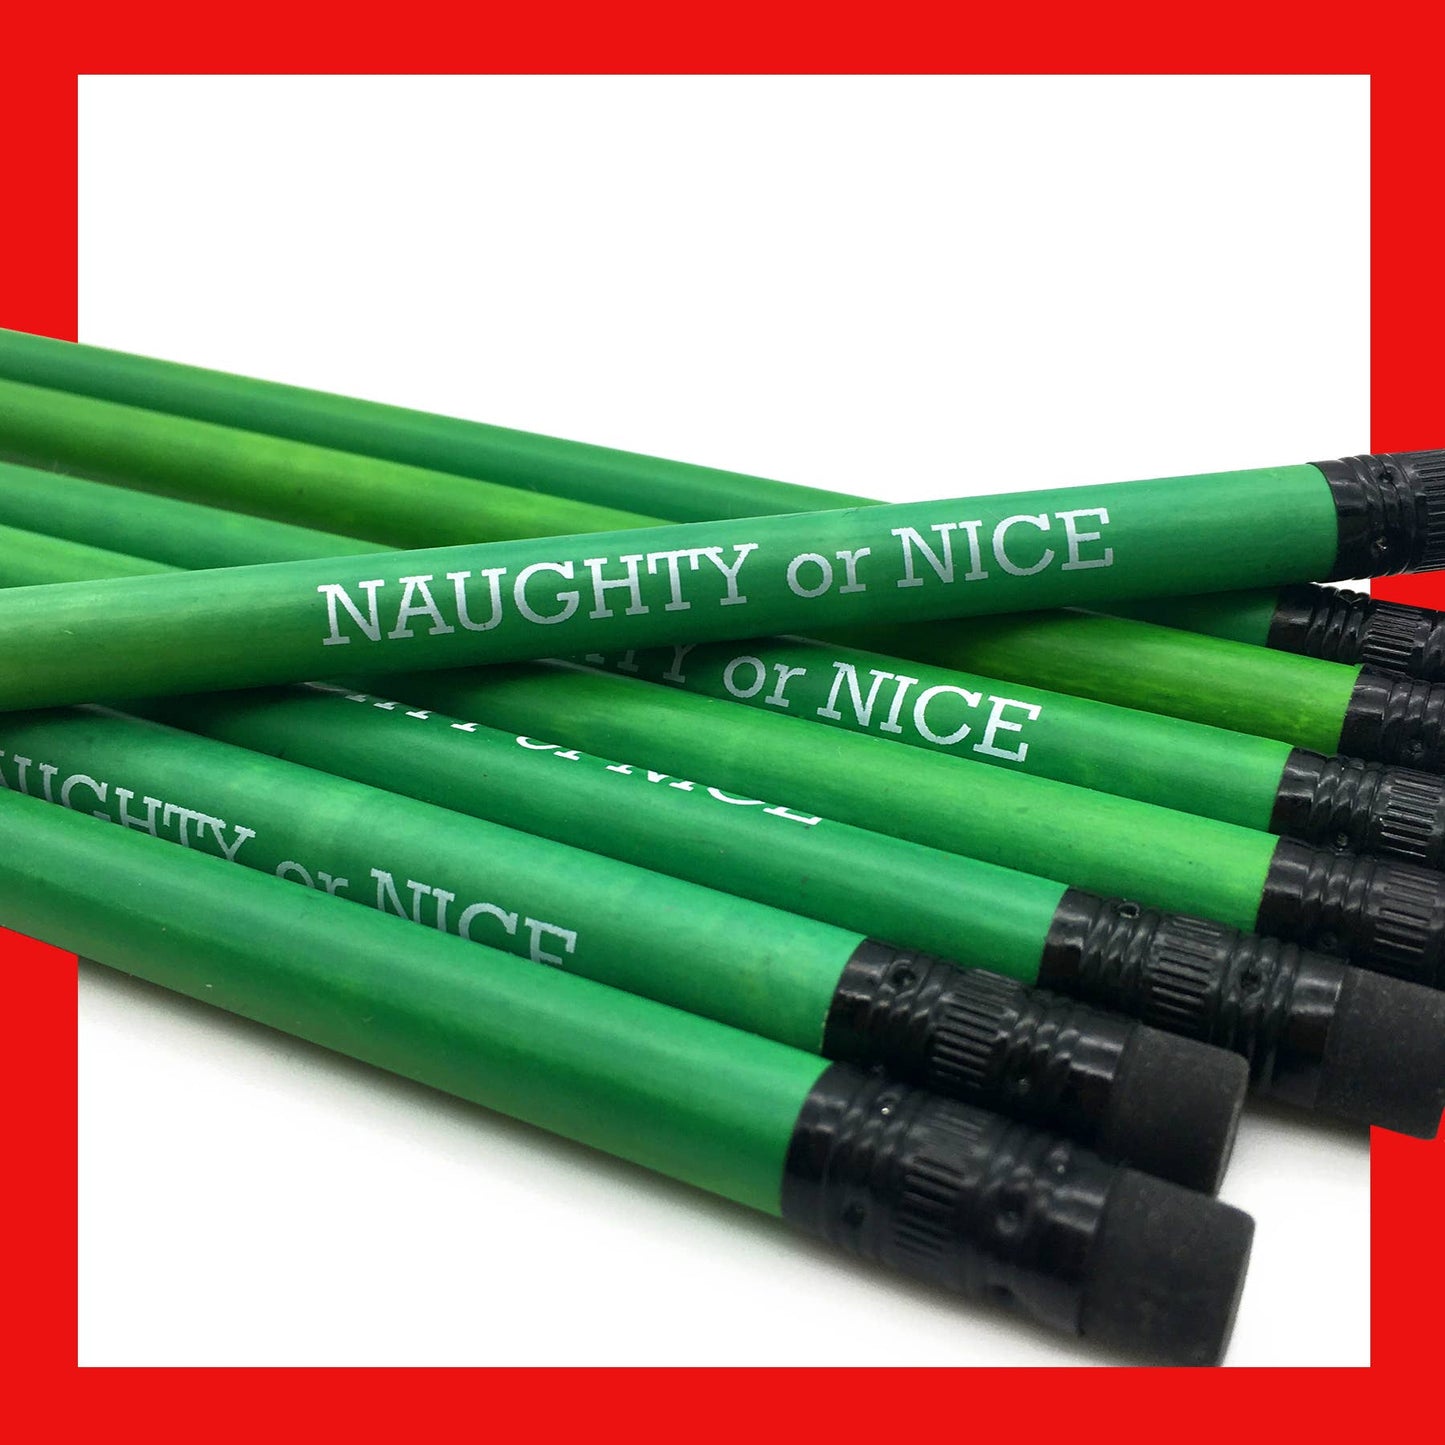 NAUGHTY OR NICE Holiday Color Changing Pencils